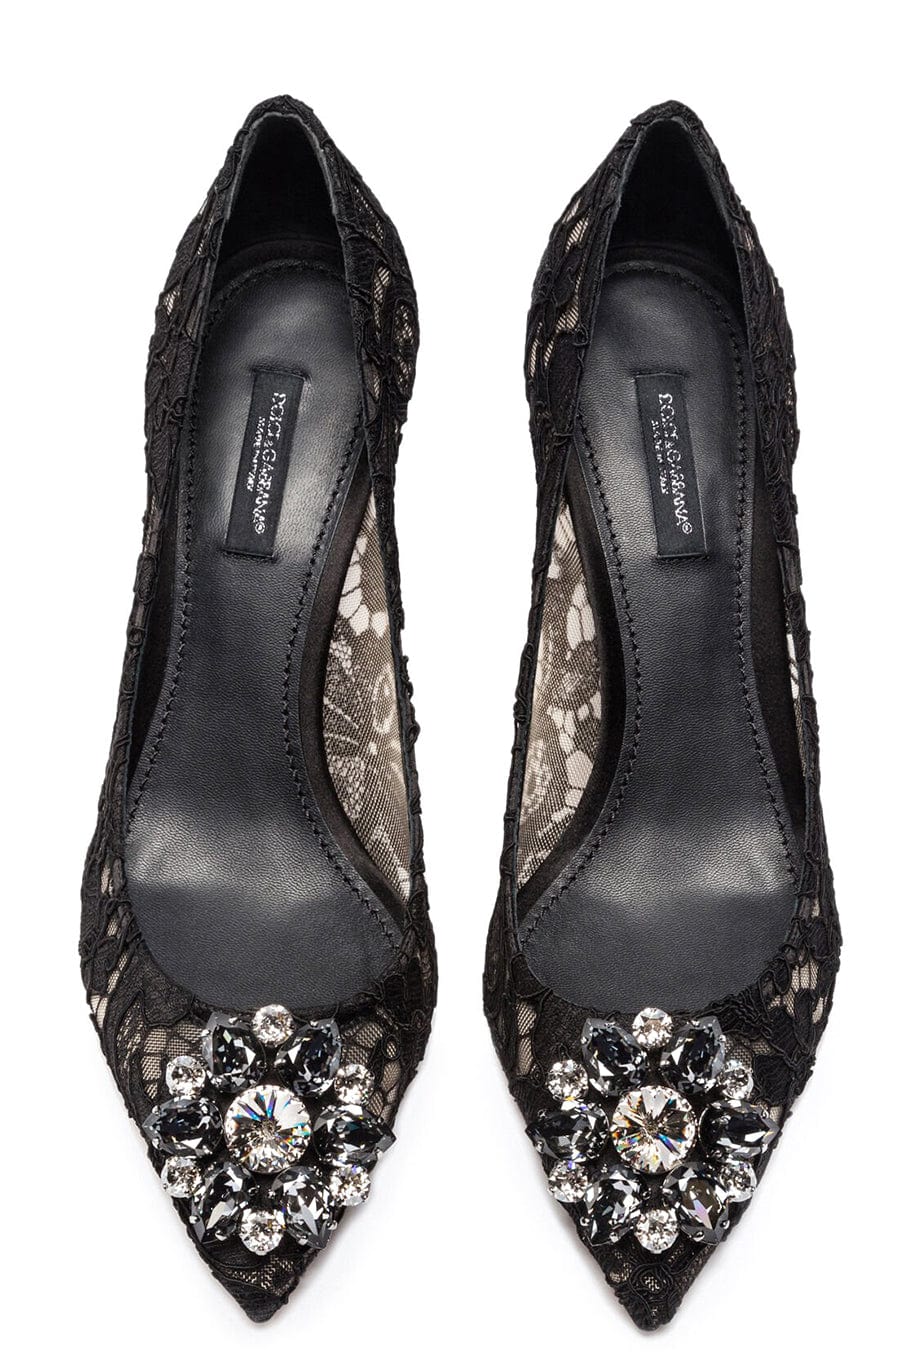 DOLCE & GABBANA-Lace Heel With Brooch-